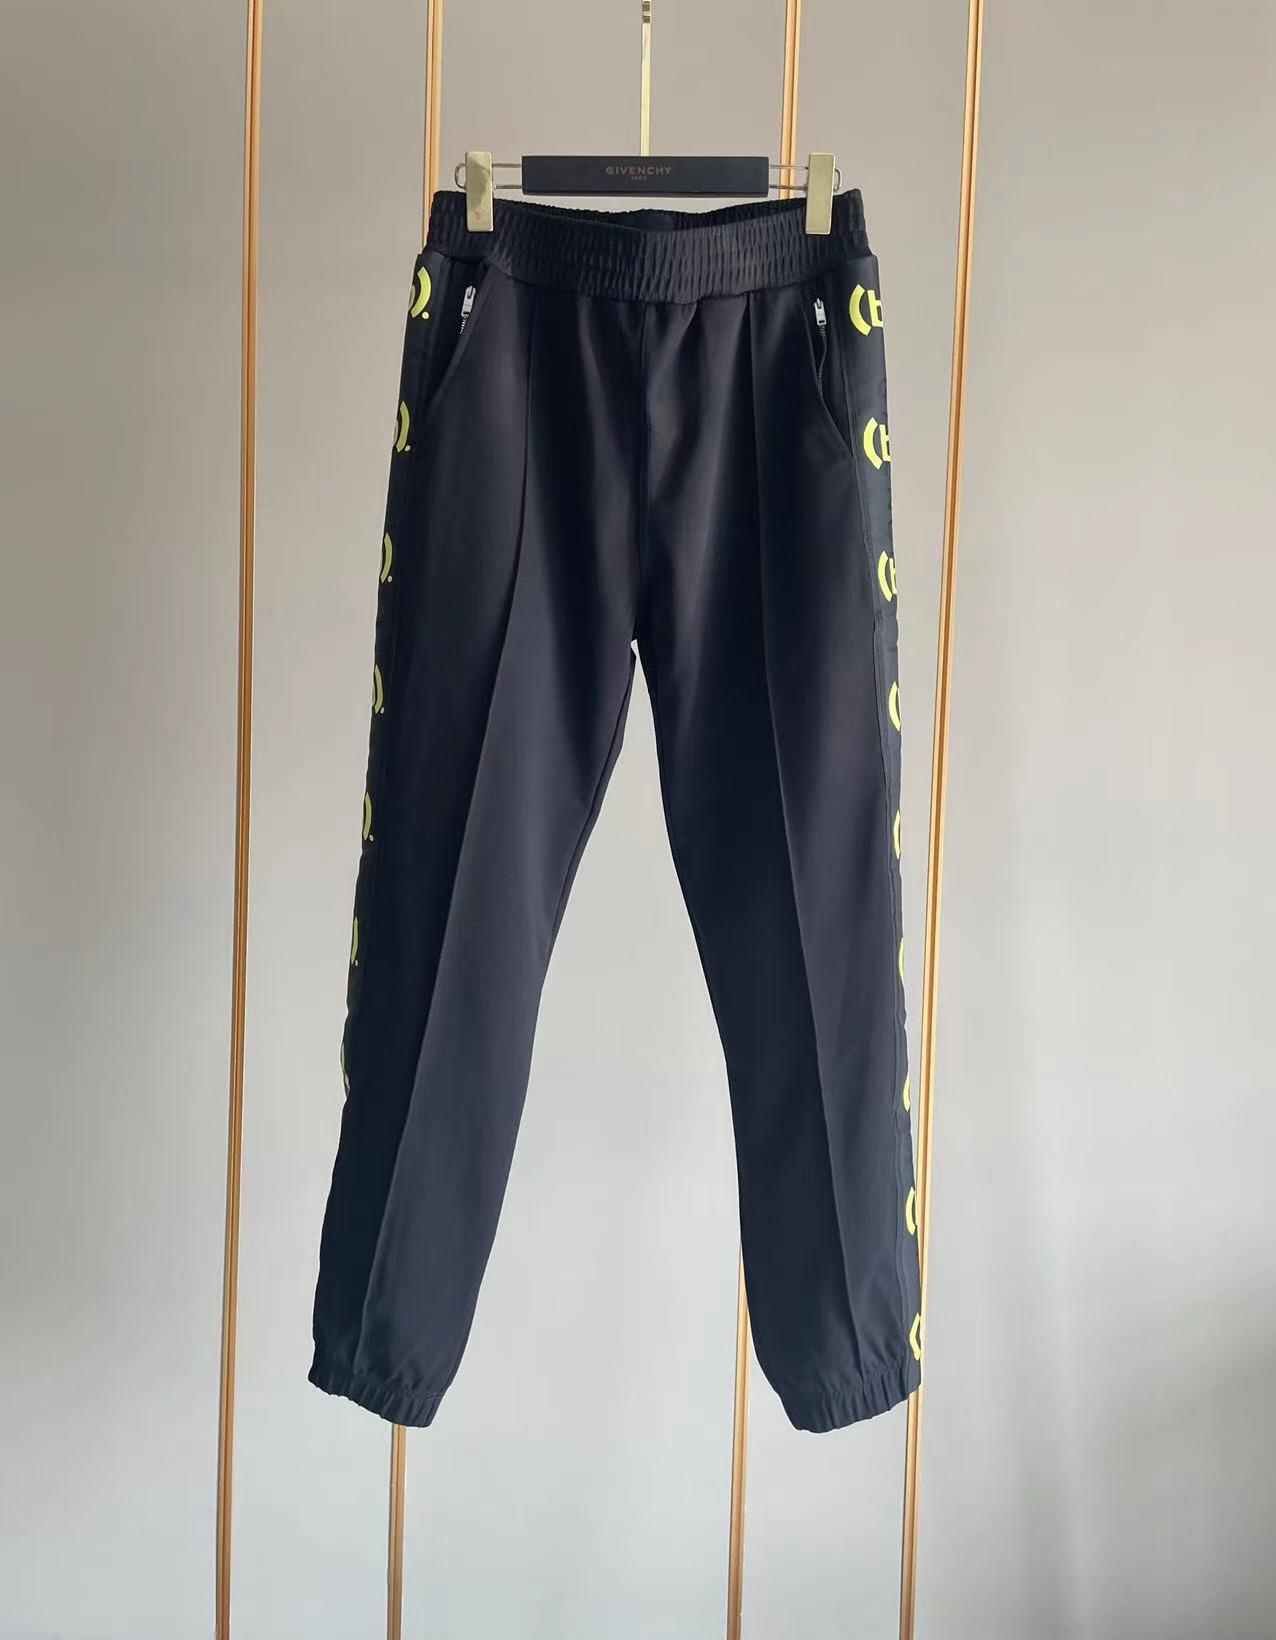 slim-fit-jogger-pants-in-jersey-with-b-printed-givenchy-bands-6622_16845014142-1000